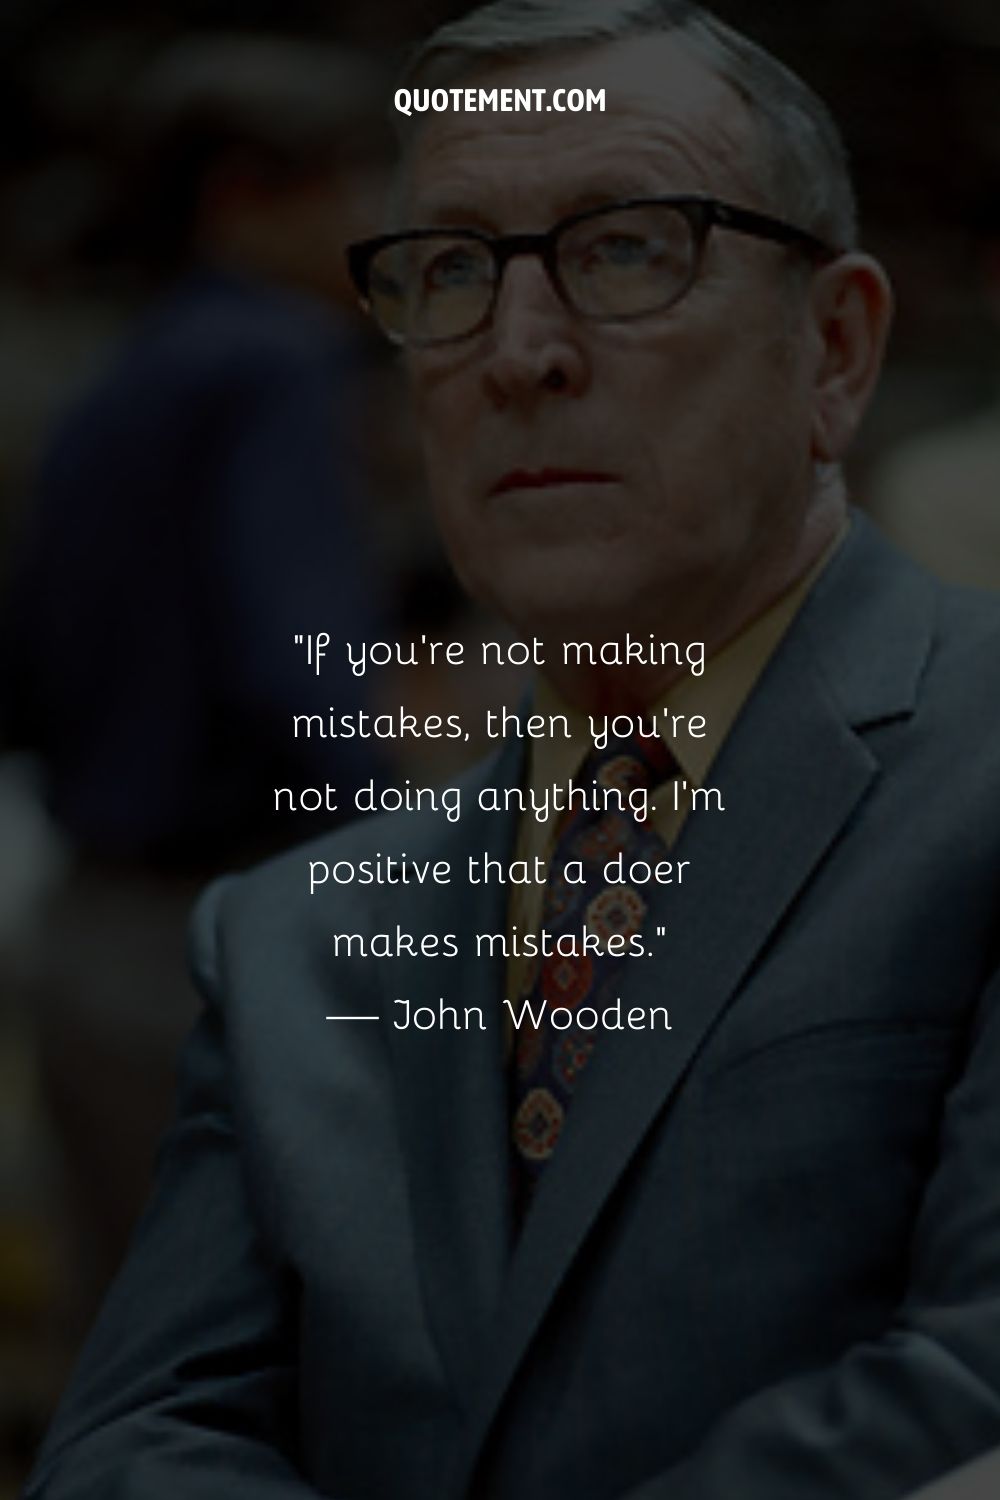 John Wooden quote for motivation.